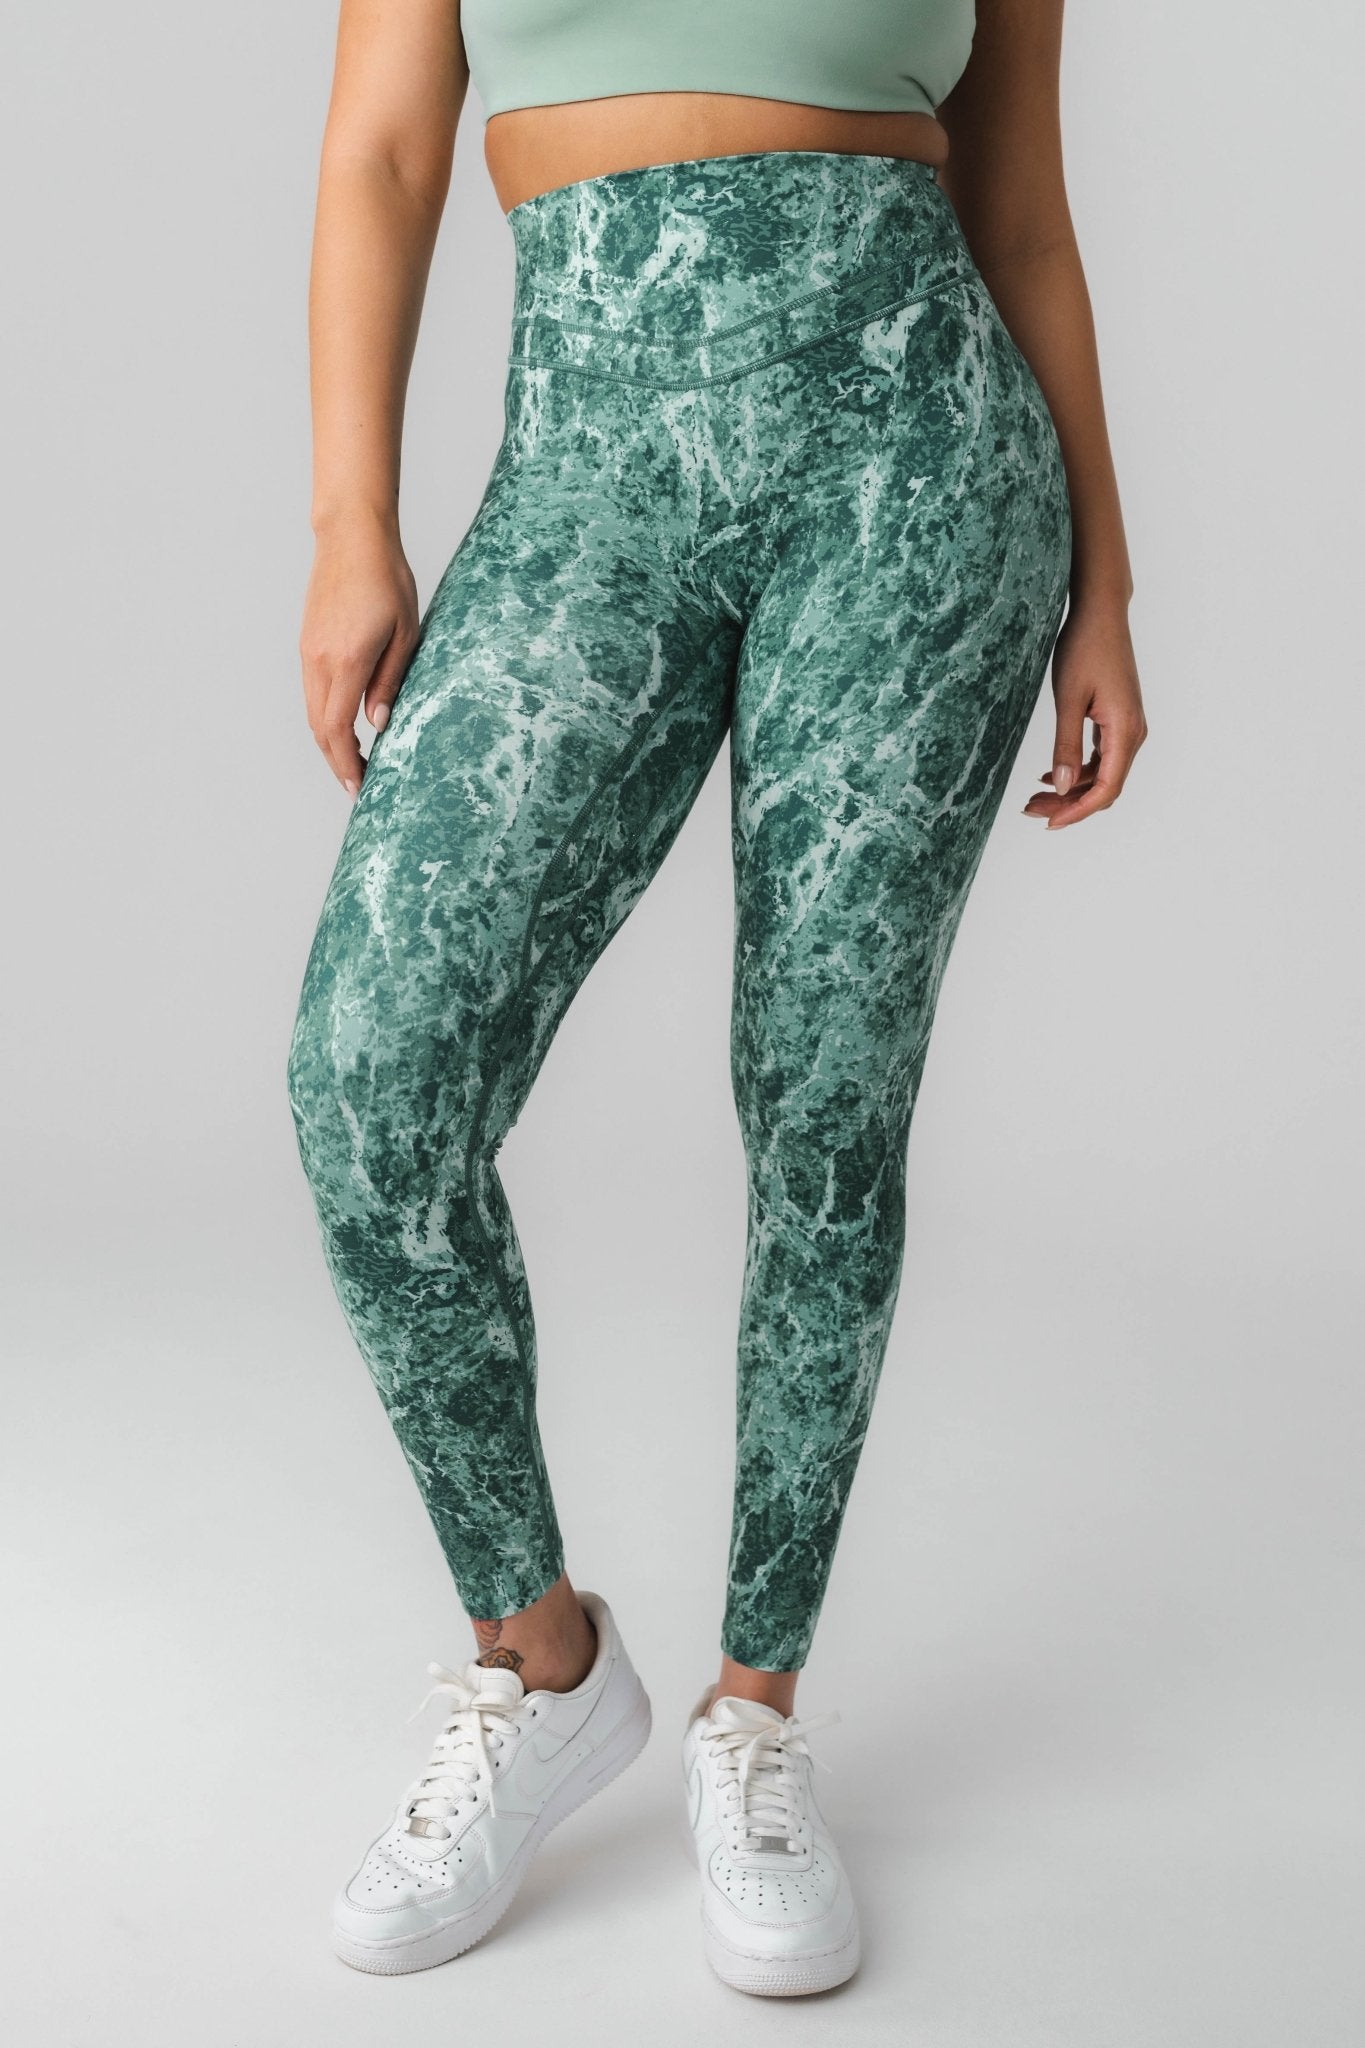 Ascend II Pant - Rainforest, Women's Bottoms from Vitality Athletic and Athleisure Wear